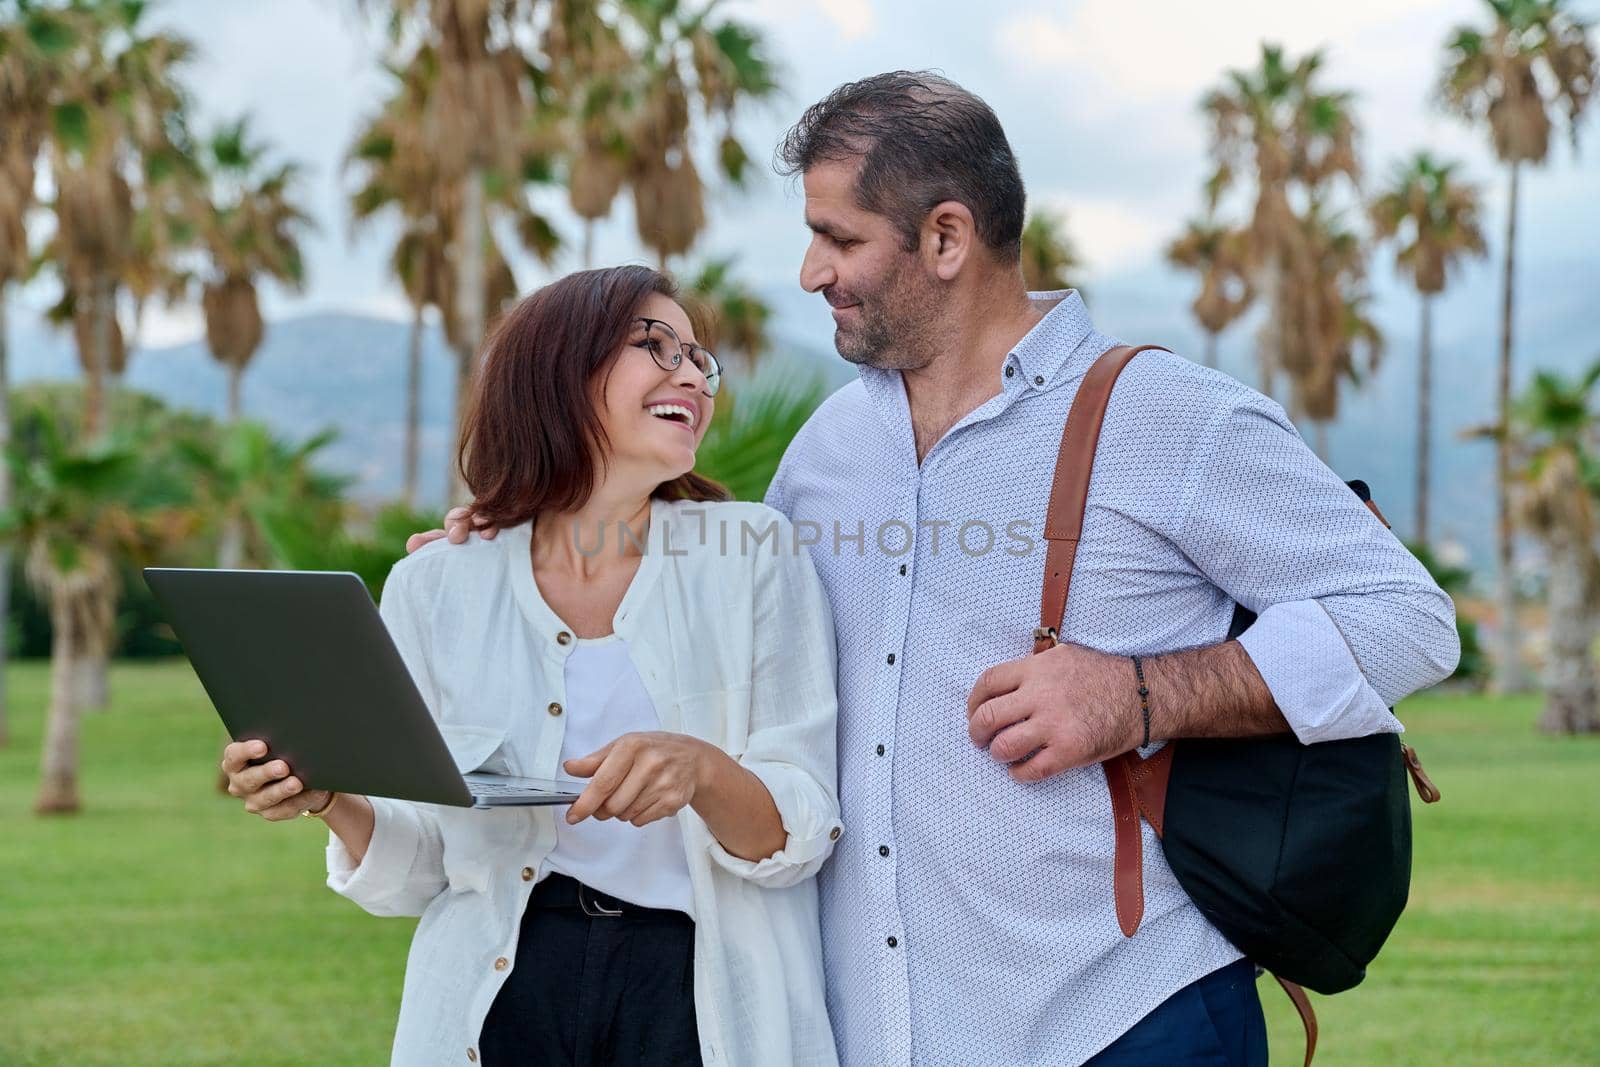 Middle-aged man and woman looking in laptop screen outdoors. Couple of business colleagues talking discussing smiling, tropical park nature background. Business, people, technology, mature age concept